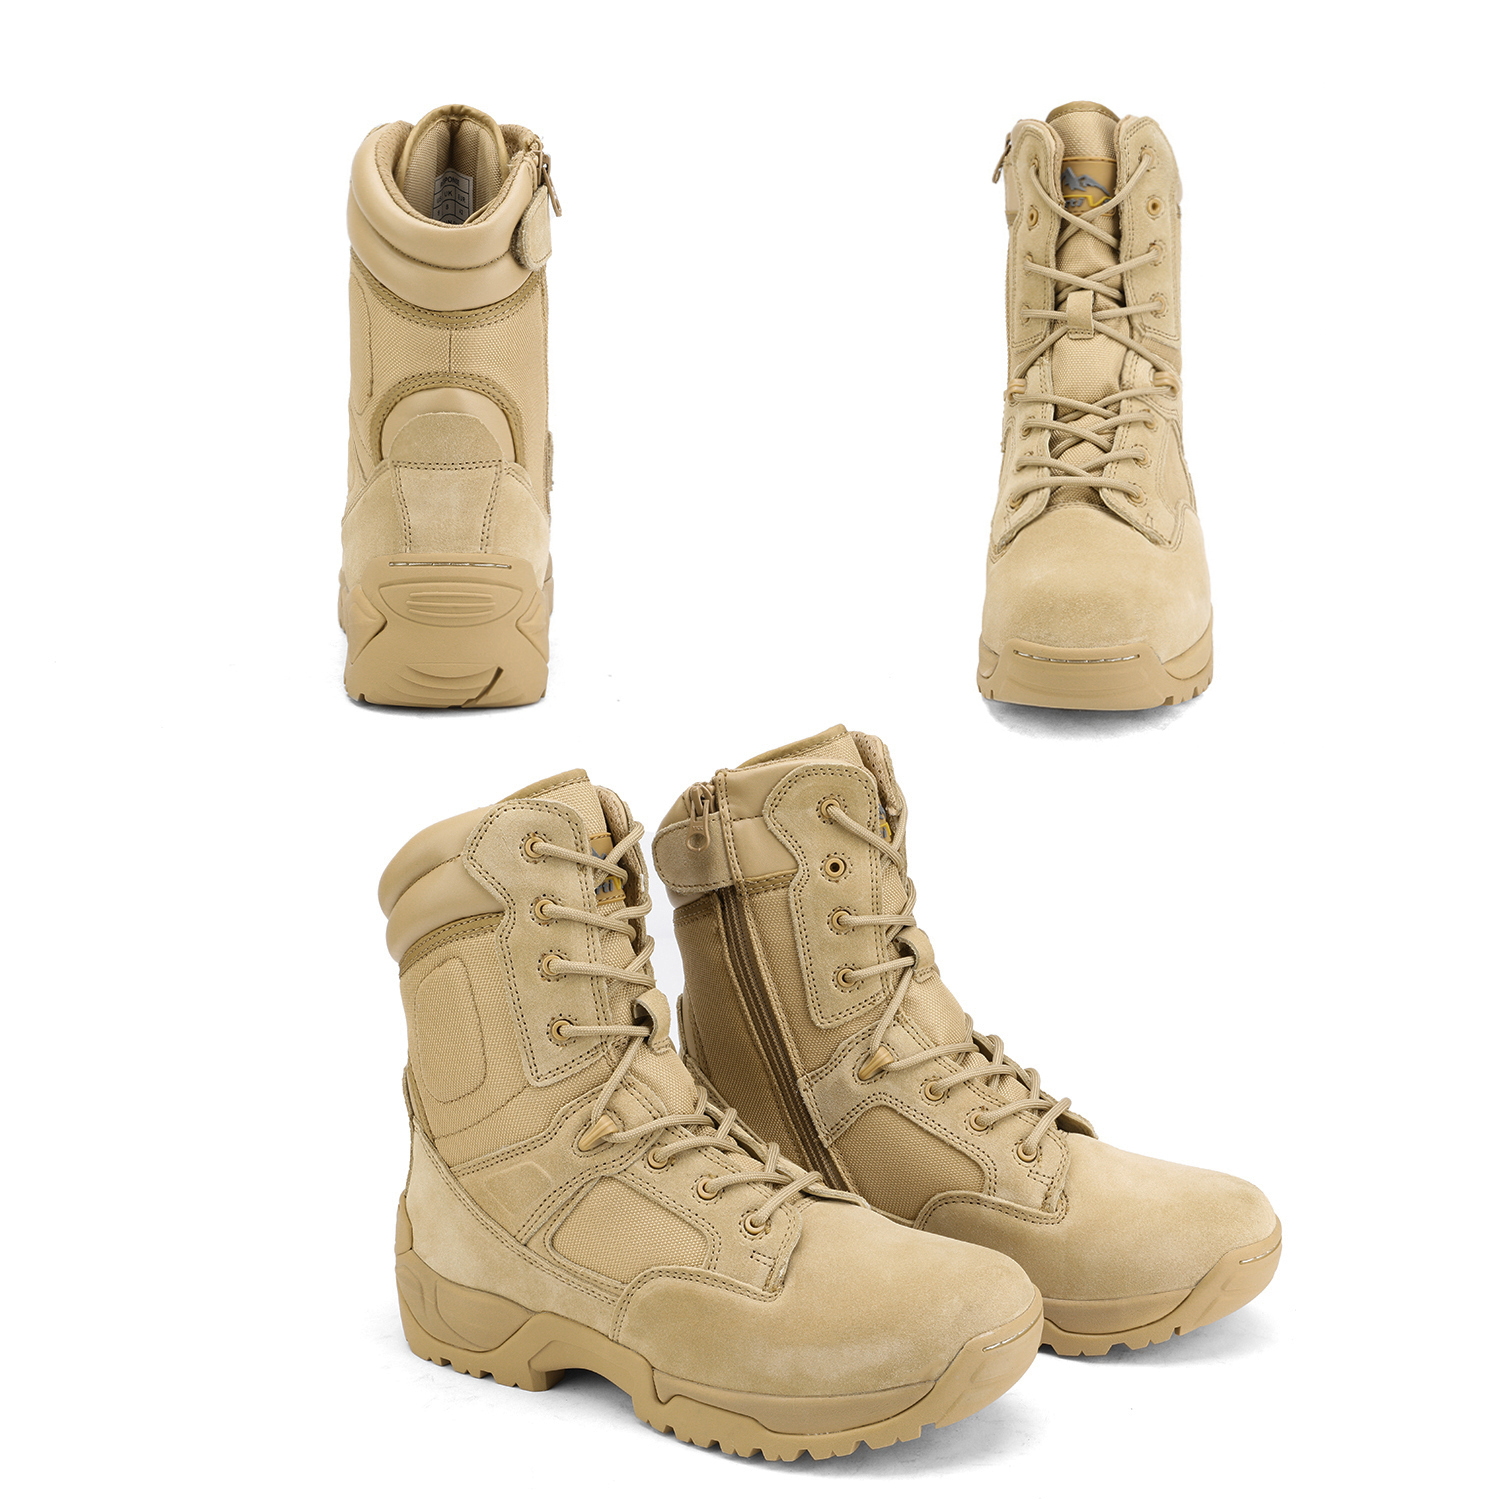 NORTIV 8 Men's Military Tactical Work Boots Hiking Motorcycle Combat Boots - image 5 of 5